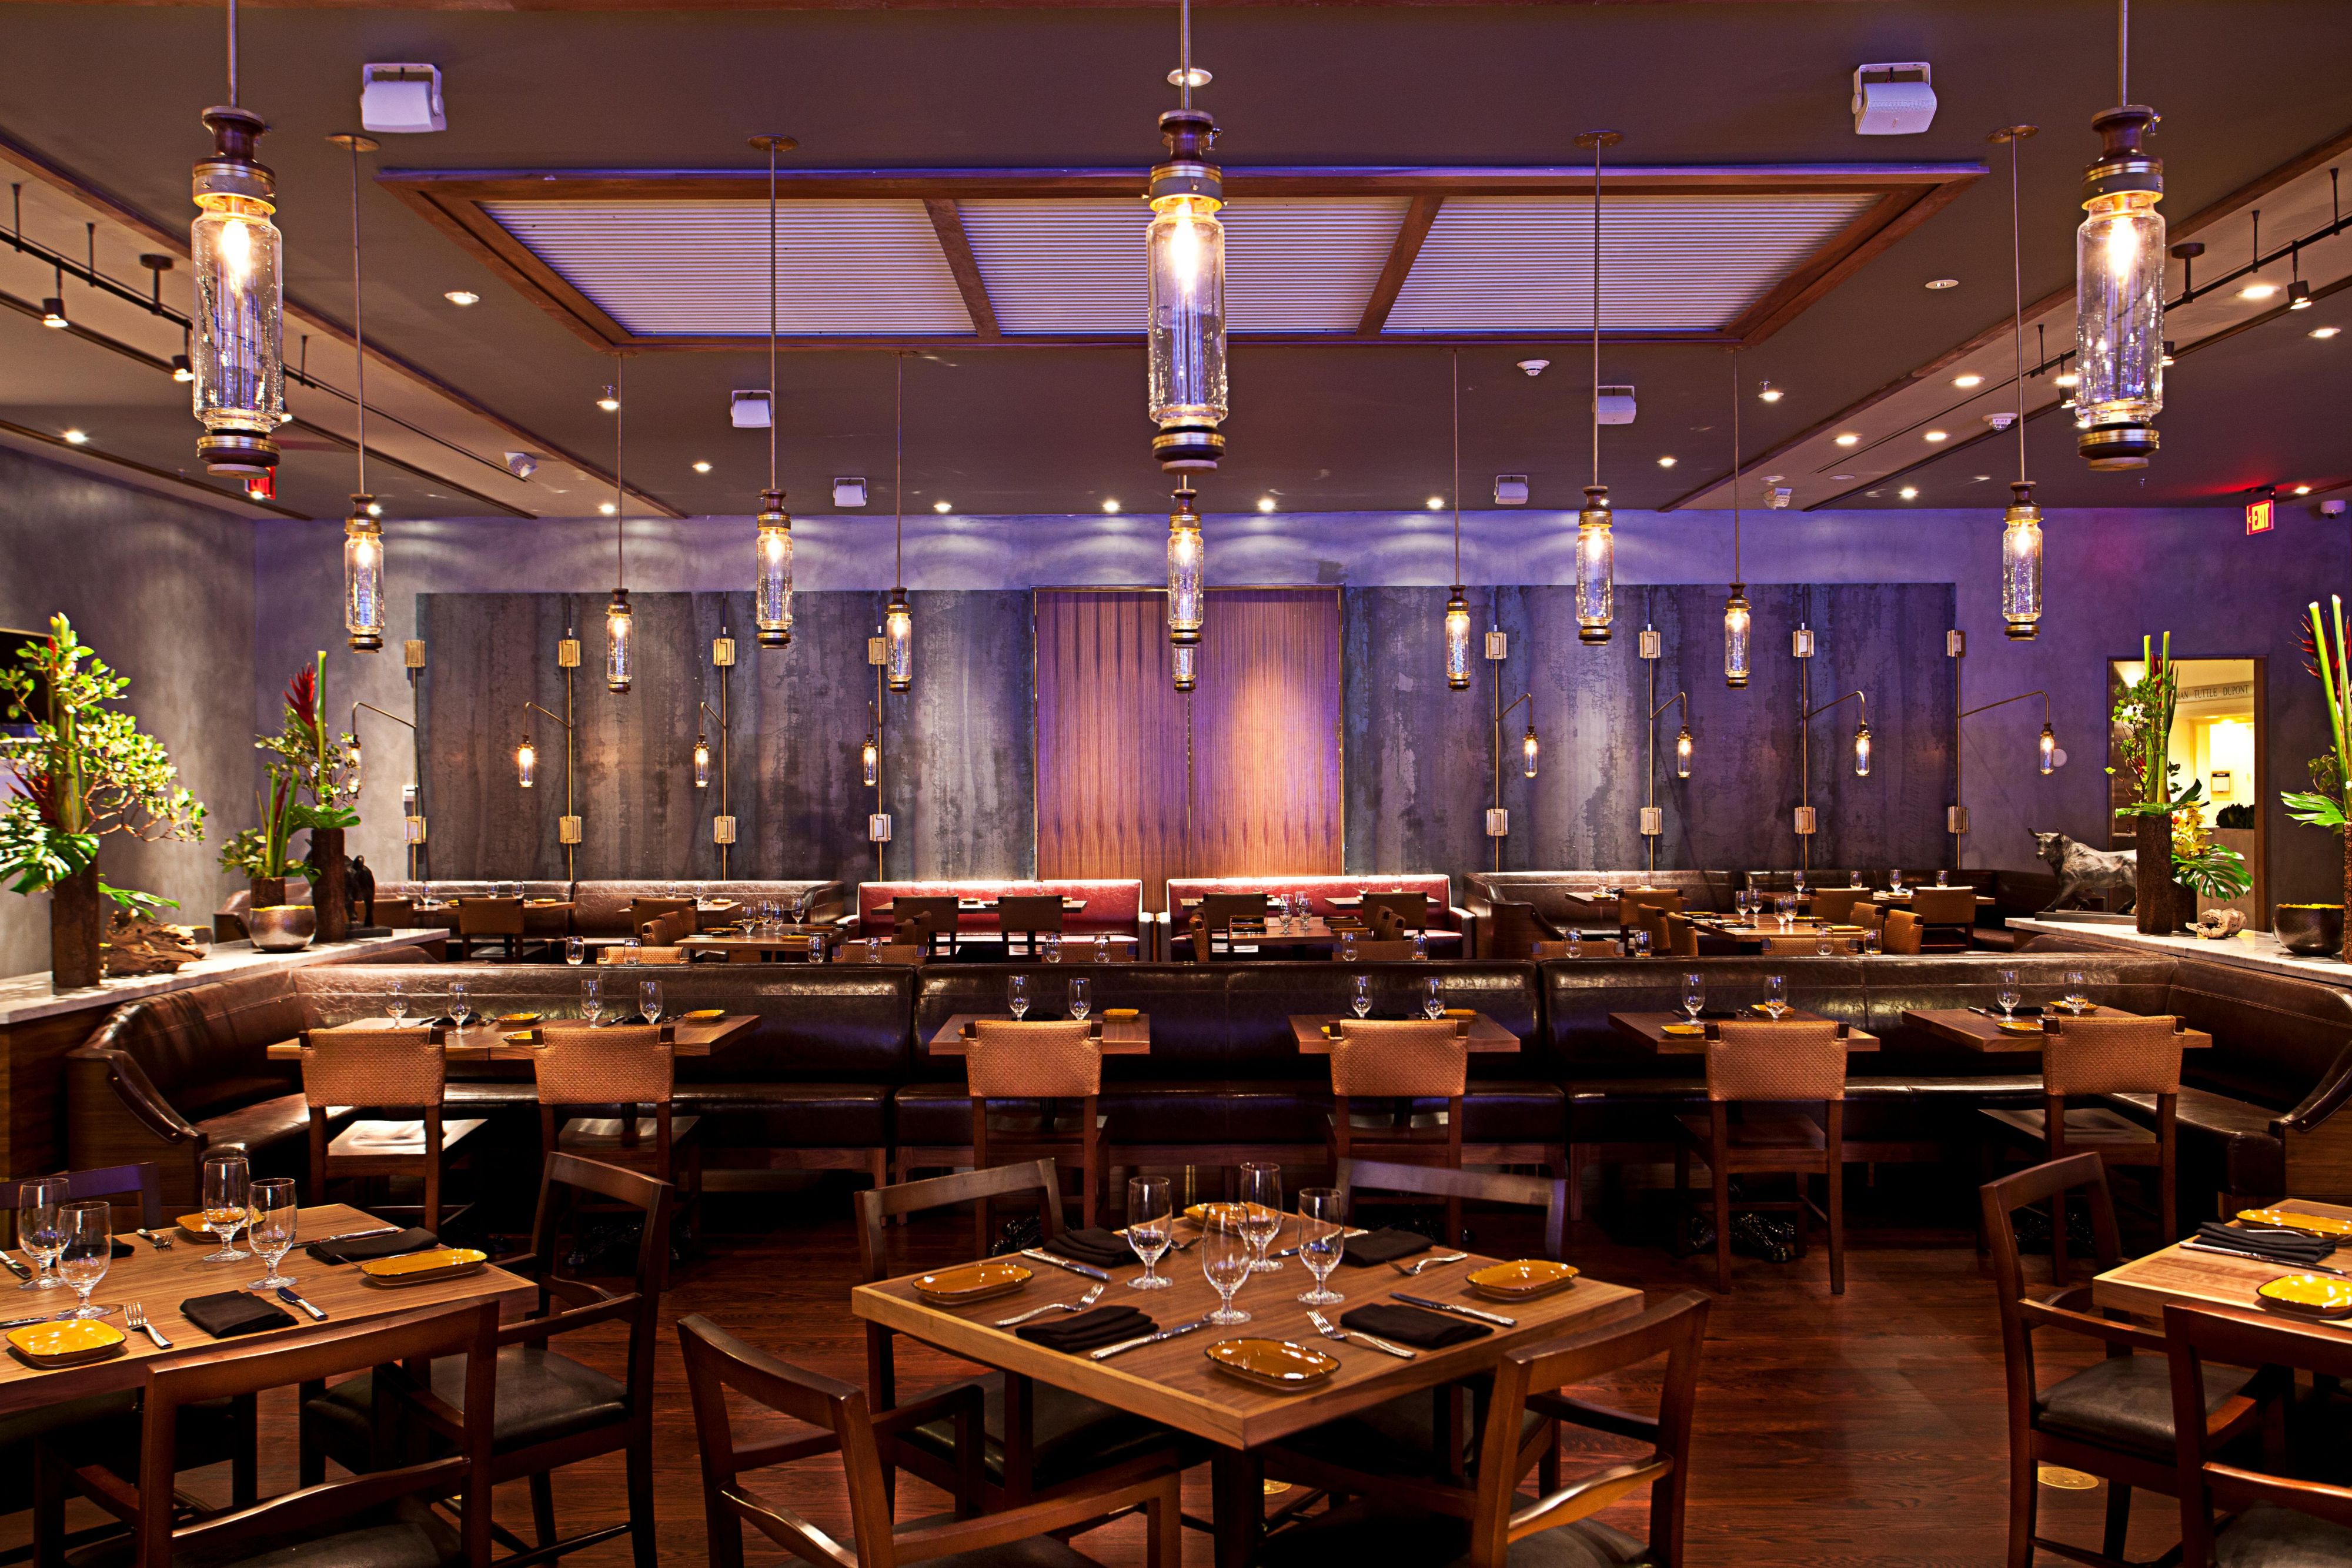 Toro Toro Dining Room perfect for groups, date night & lunch